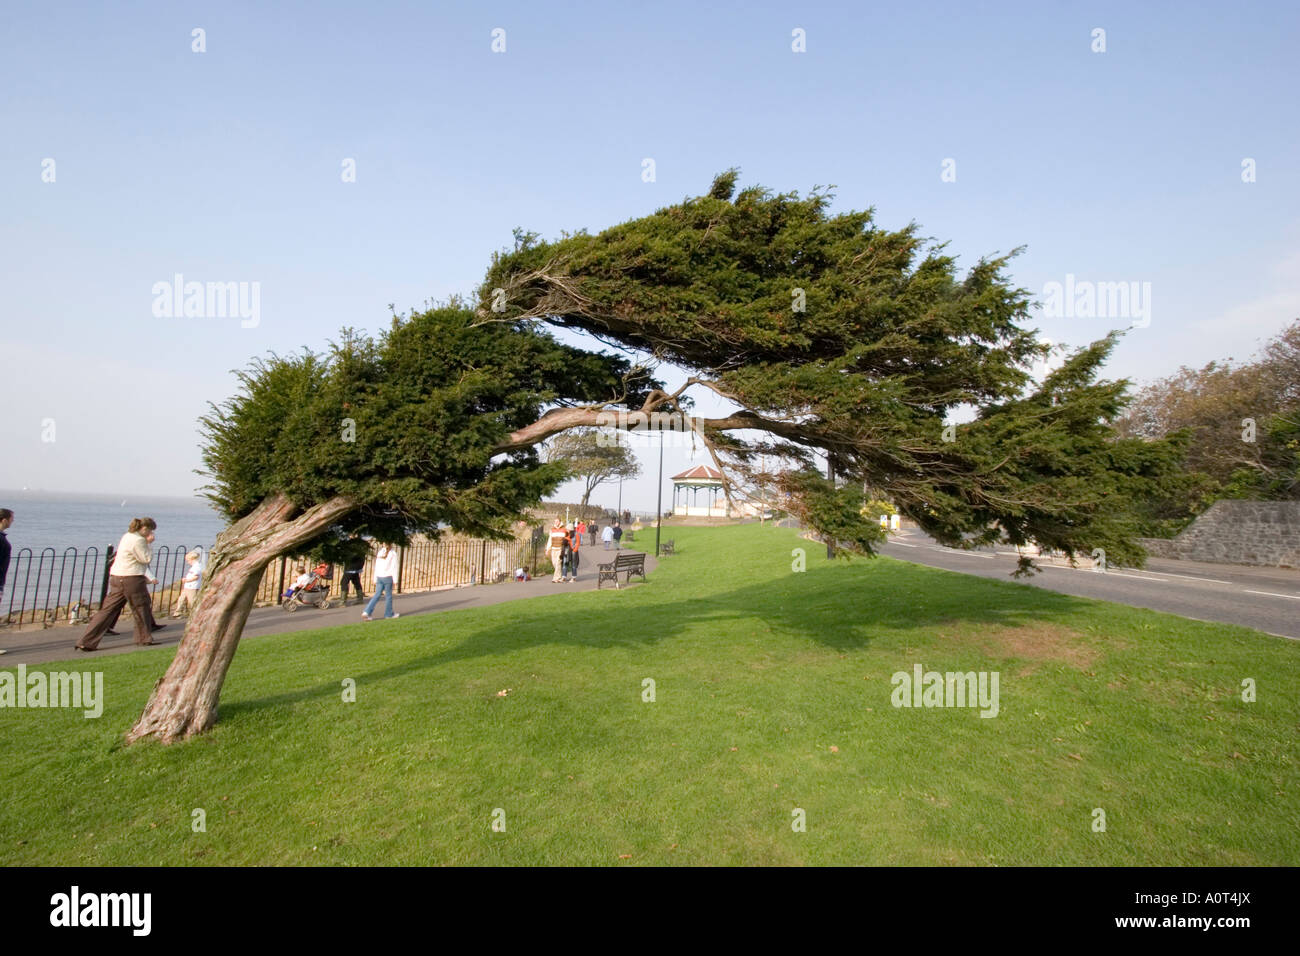 Tree at Clevedon in Somerset bent over by the prevailing winds Stock Photo